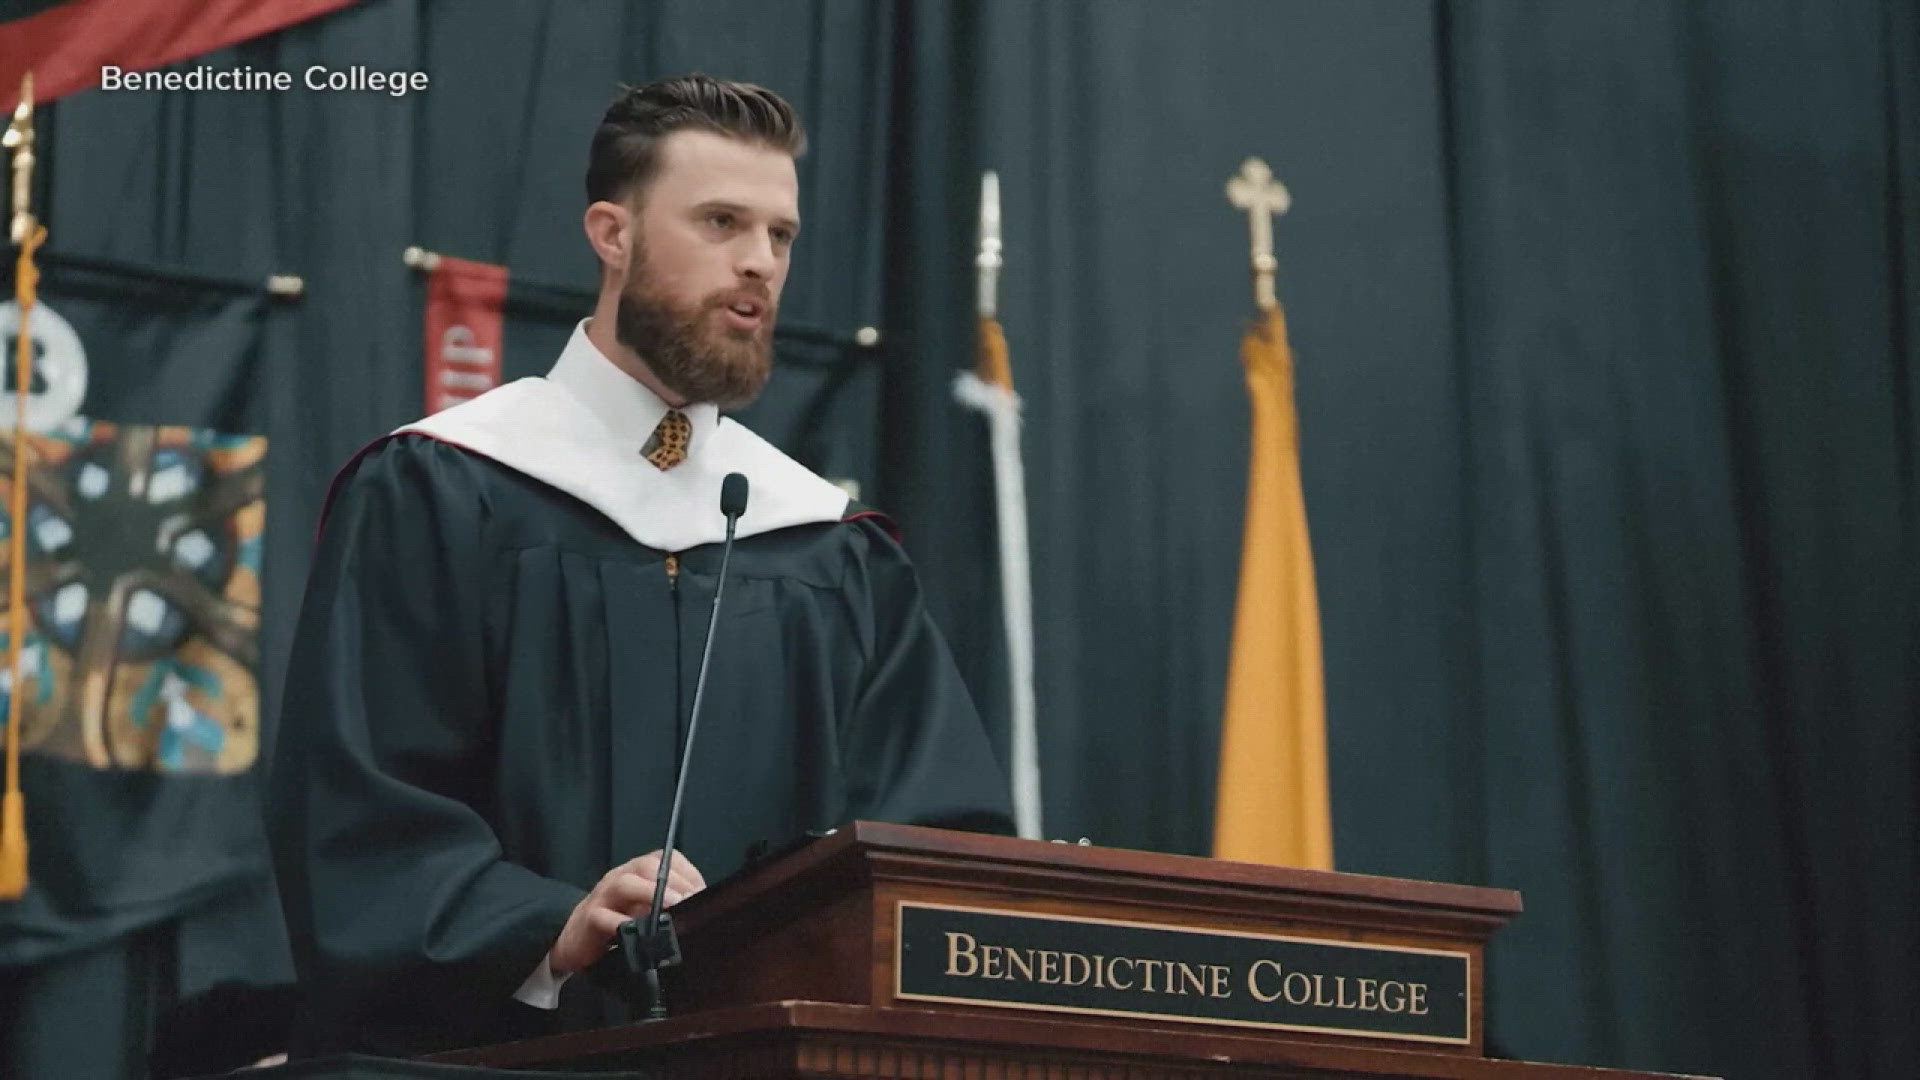 He gave a college commencement speech criticizing working women and calling Pride Month a "deadly sin."